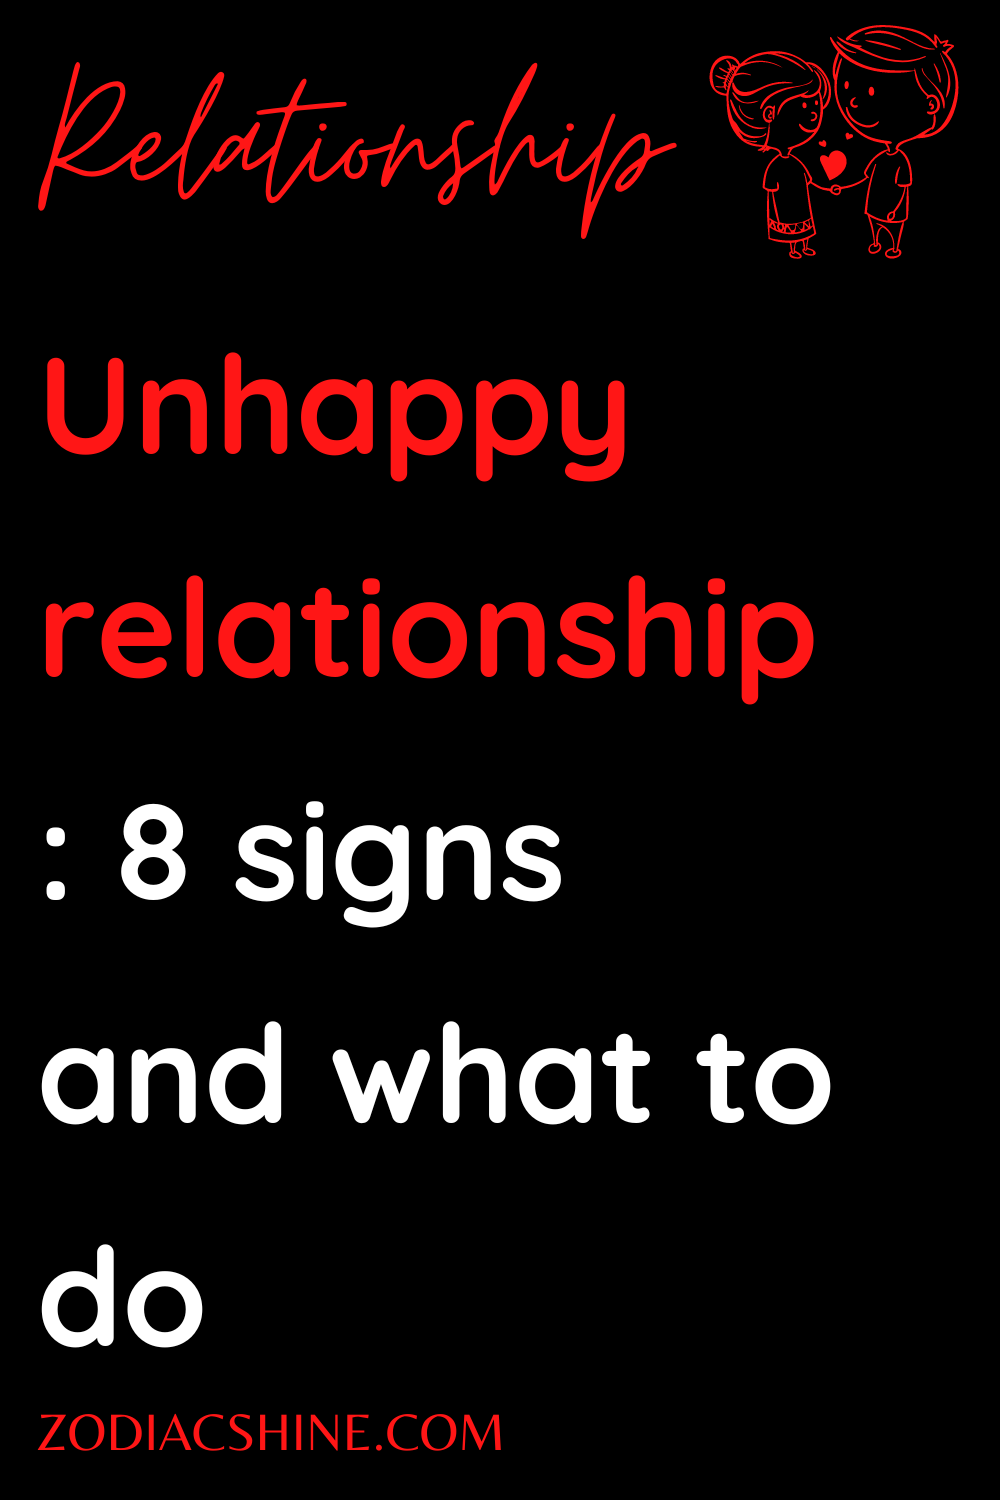 Unhappy relationship: 8 signs and what to do